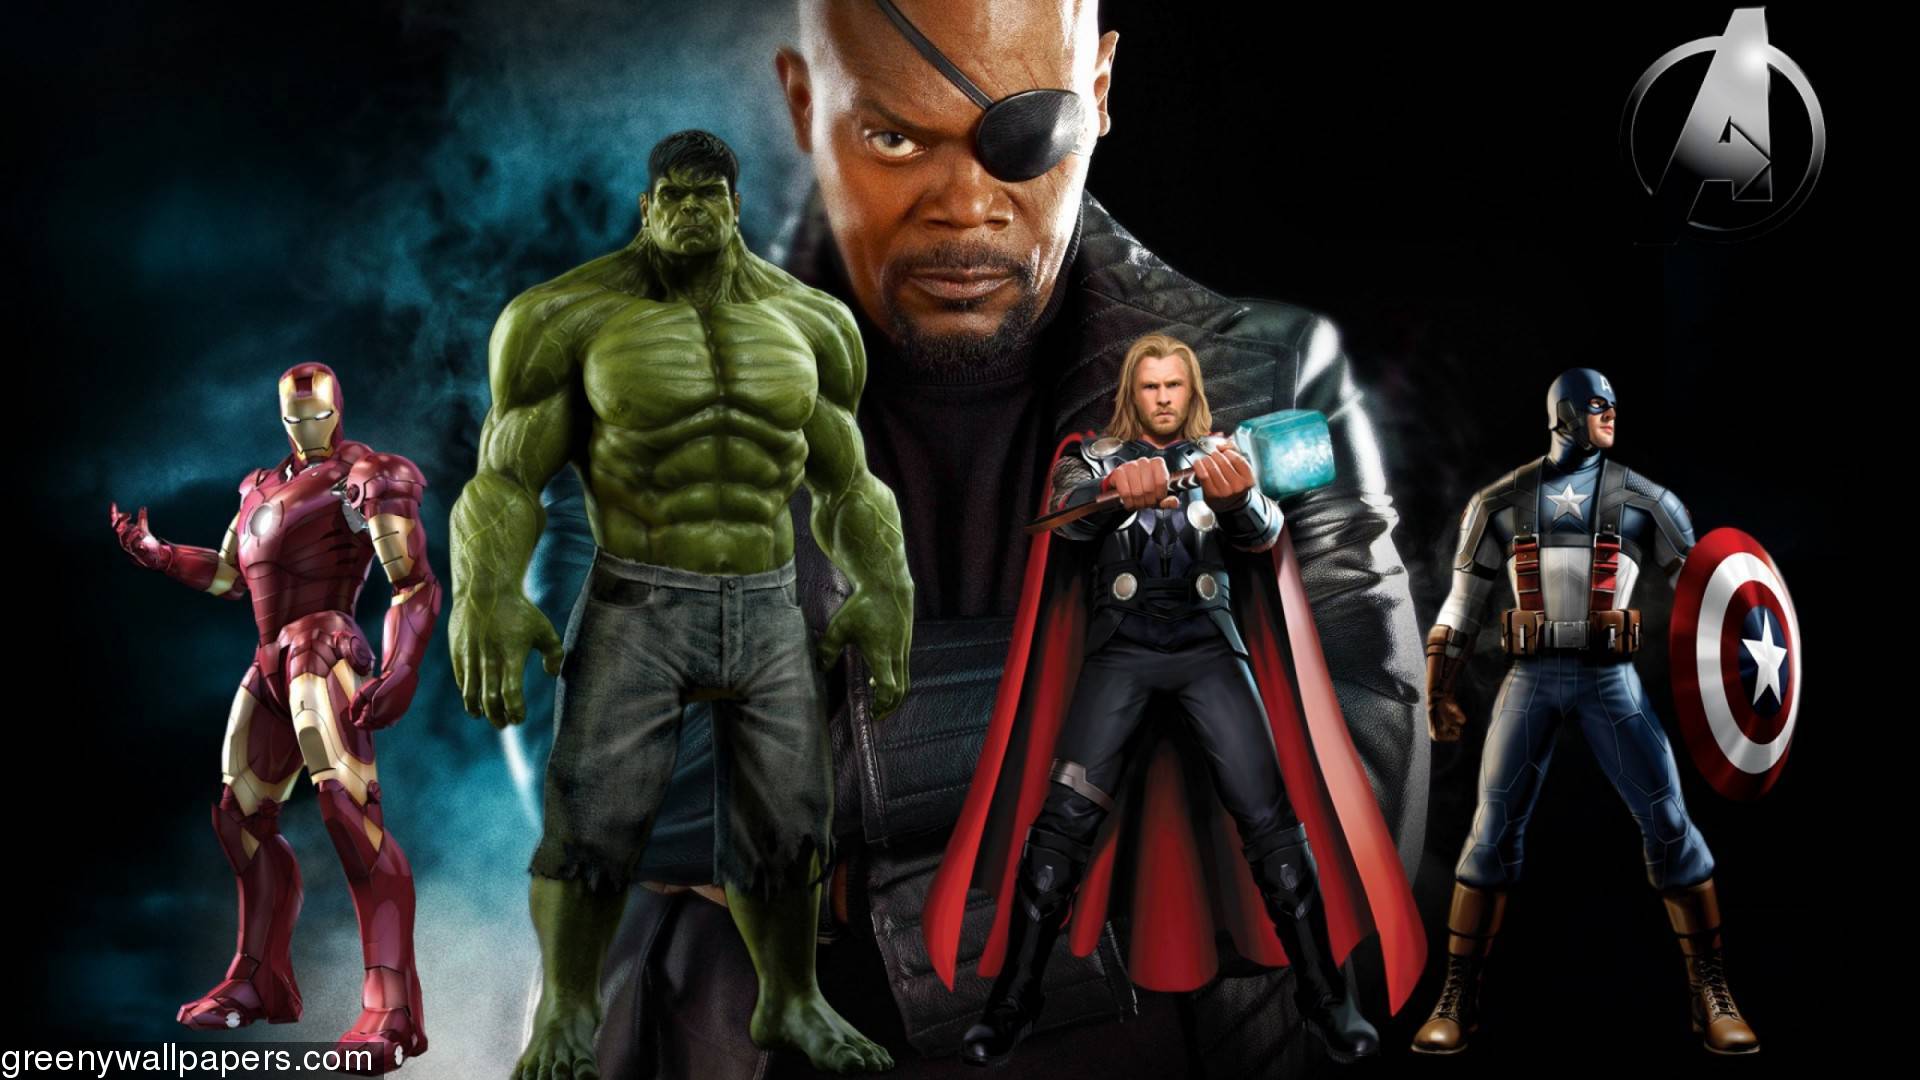 Download The Avengers 2 Marvel Hd 1920x1080 Wallpaper